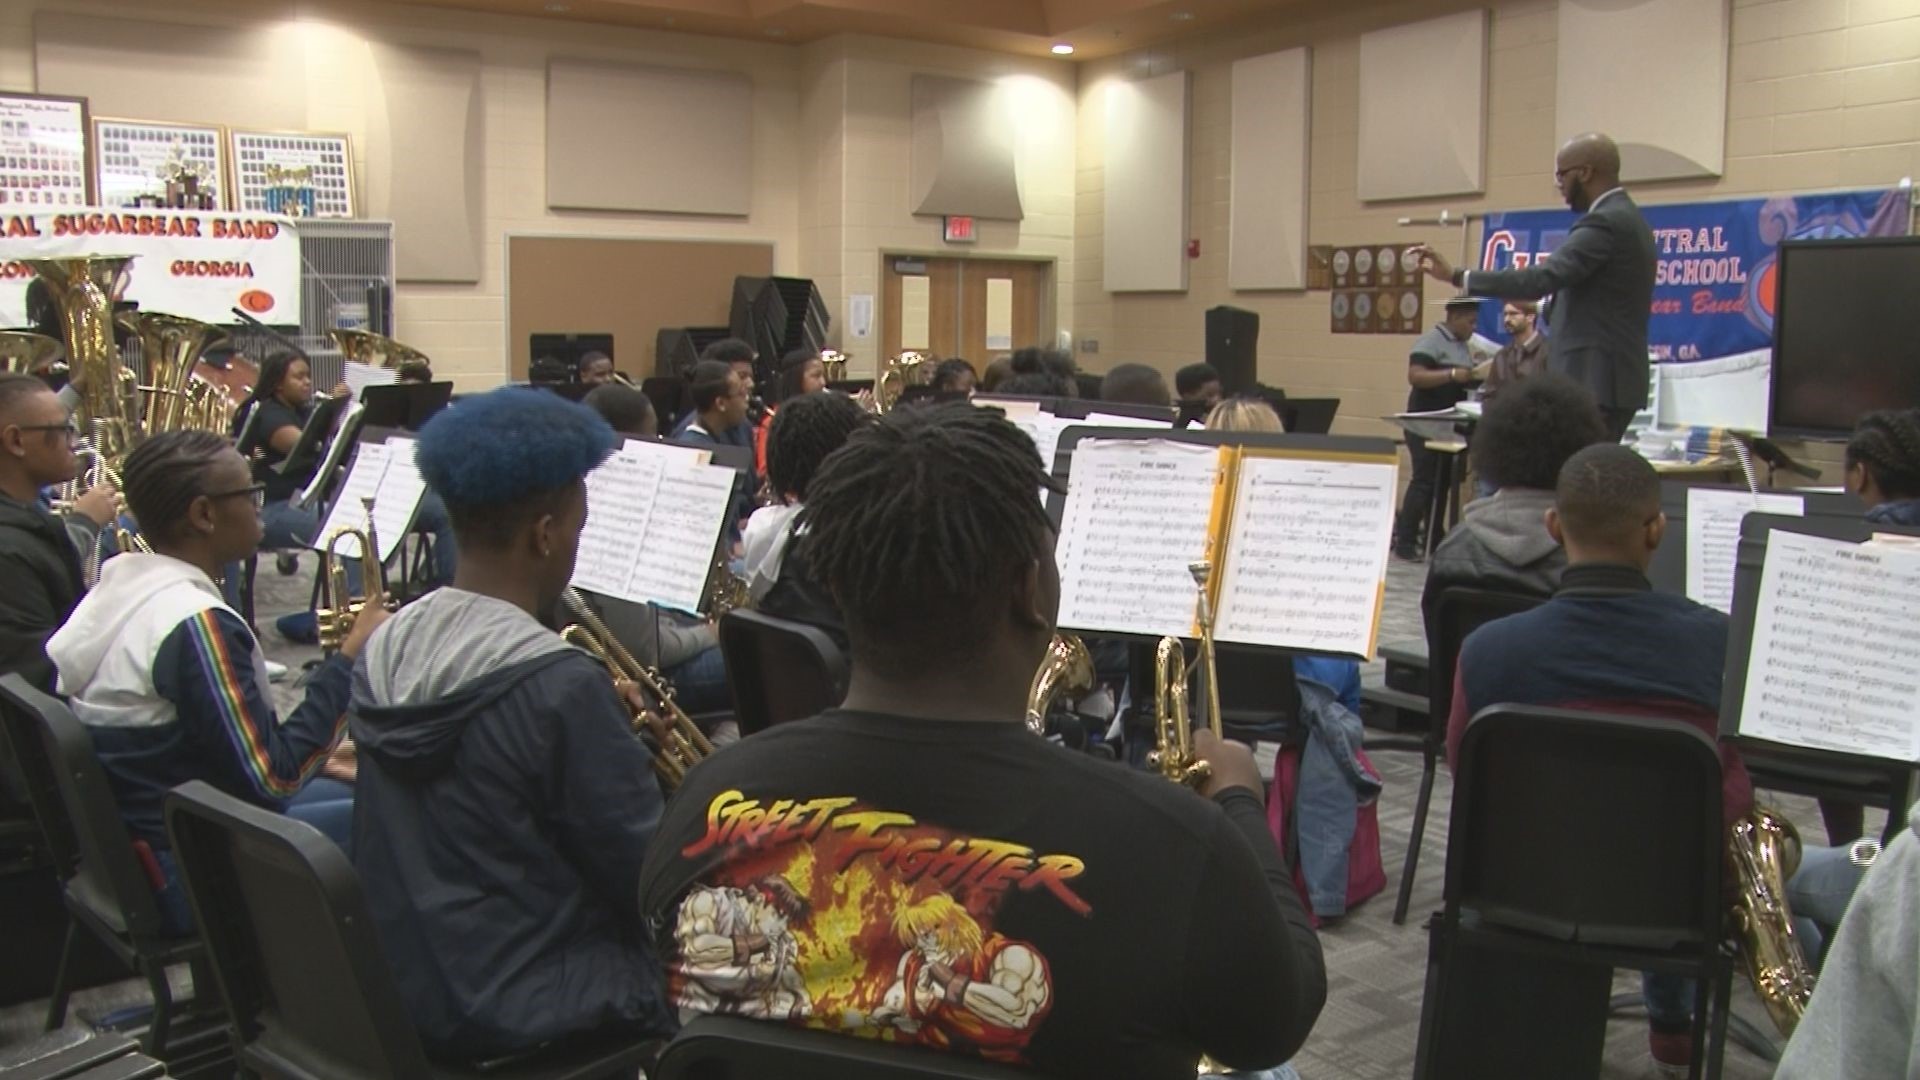 Central High’s Sugarbear Band prepares for their annual state evaluation performance, aiming to get another top score like they have for the past decade.